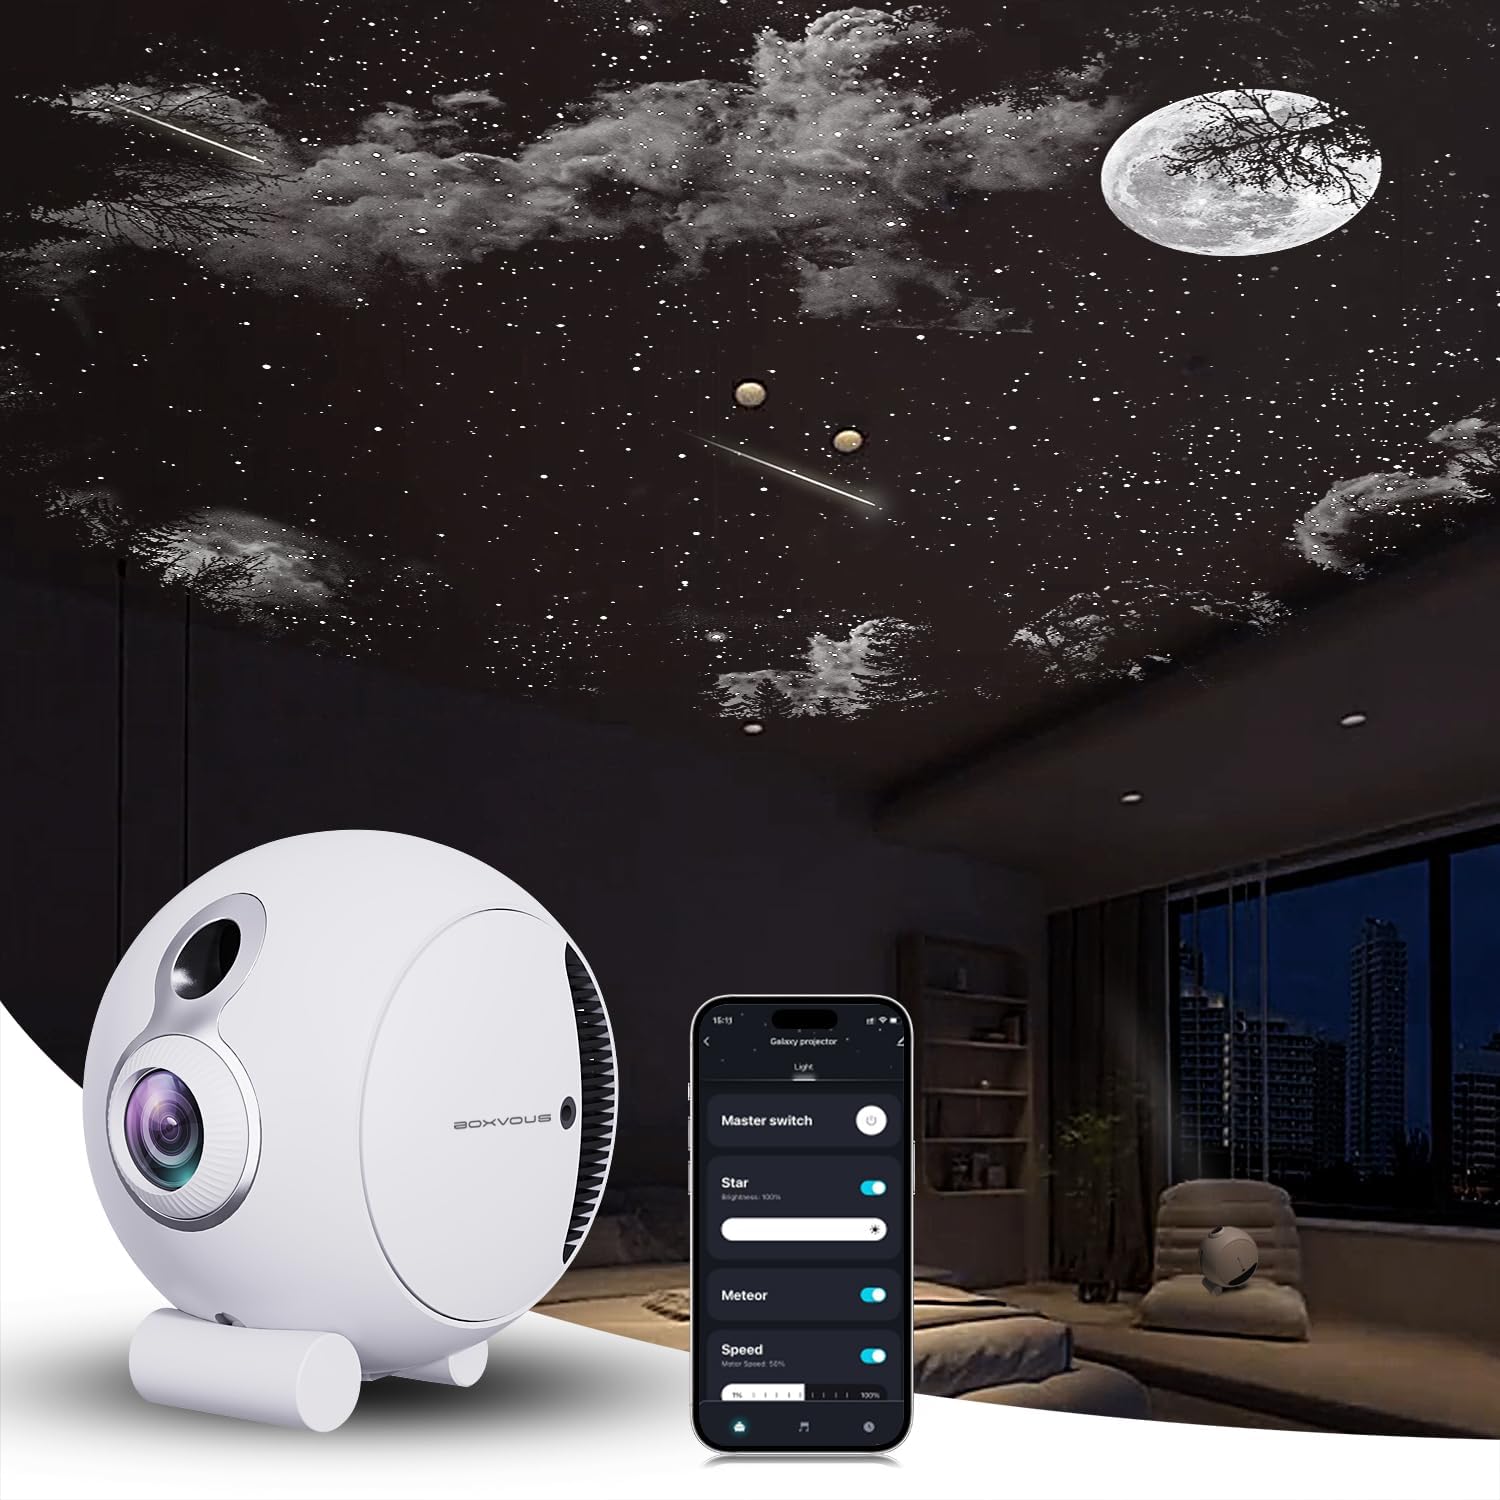 Plus smart starry sky projector-20W 60㎡ coverage-Ktvhomes